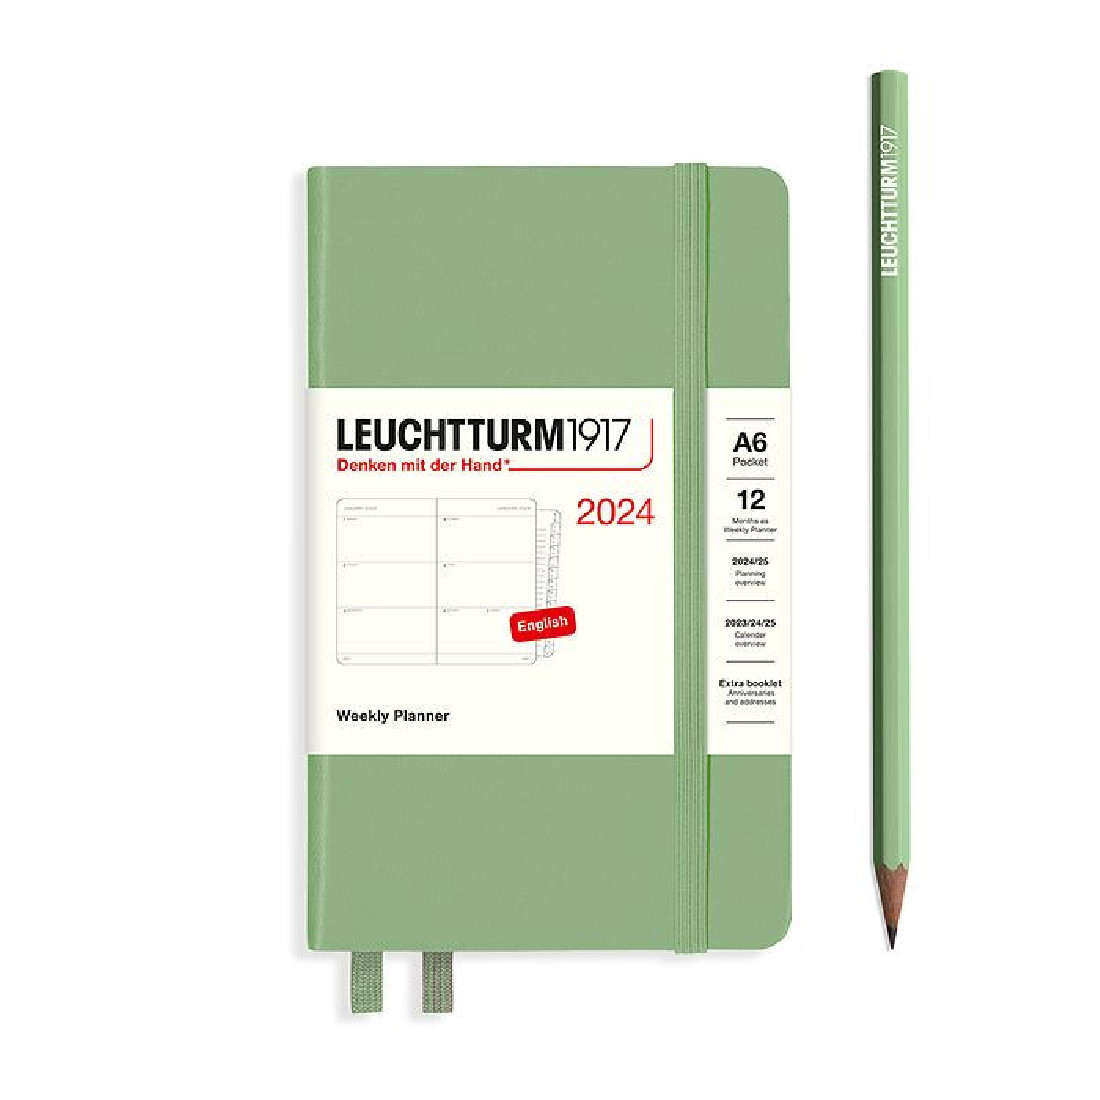 Leuchtturm 1917 Weekly Planner and Notebook 2024 Port Red Pocket